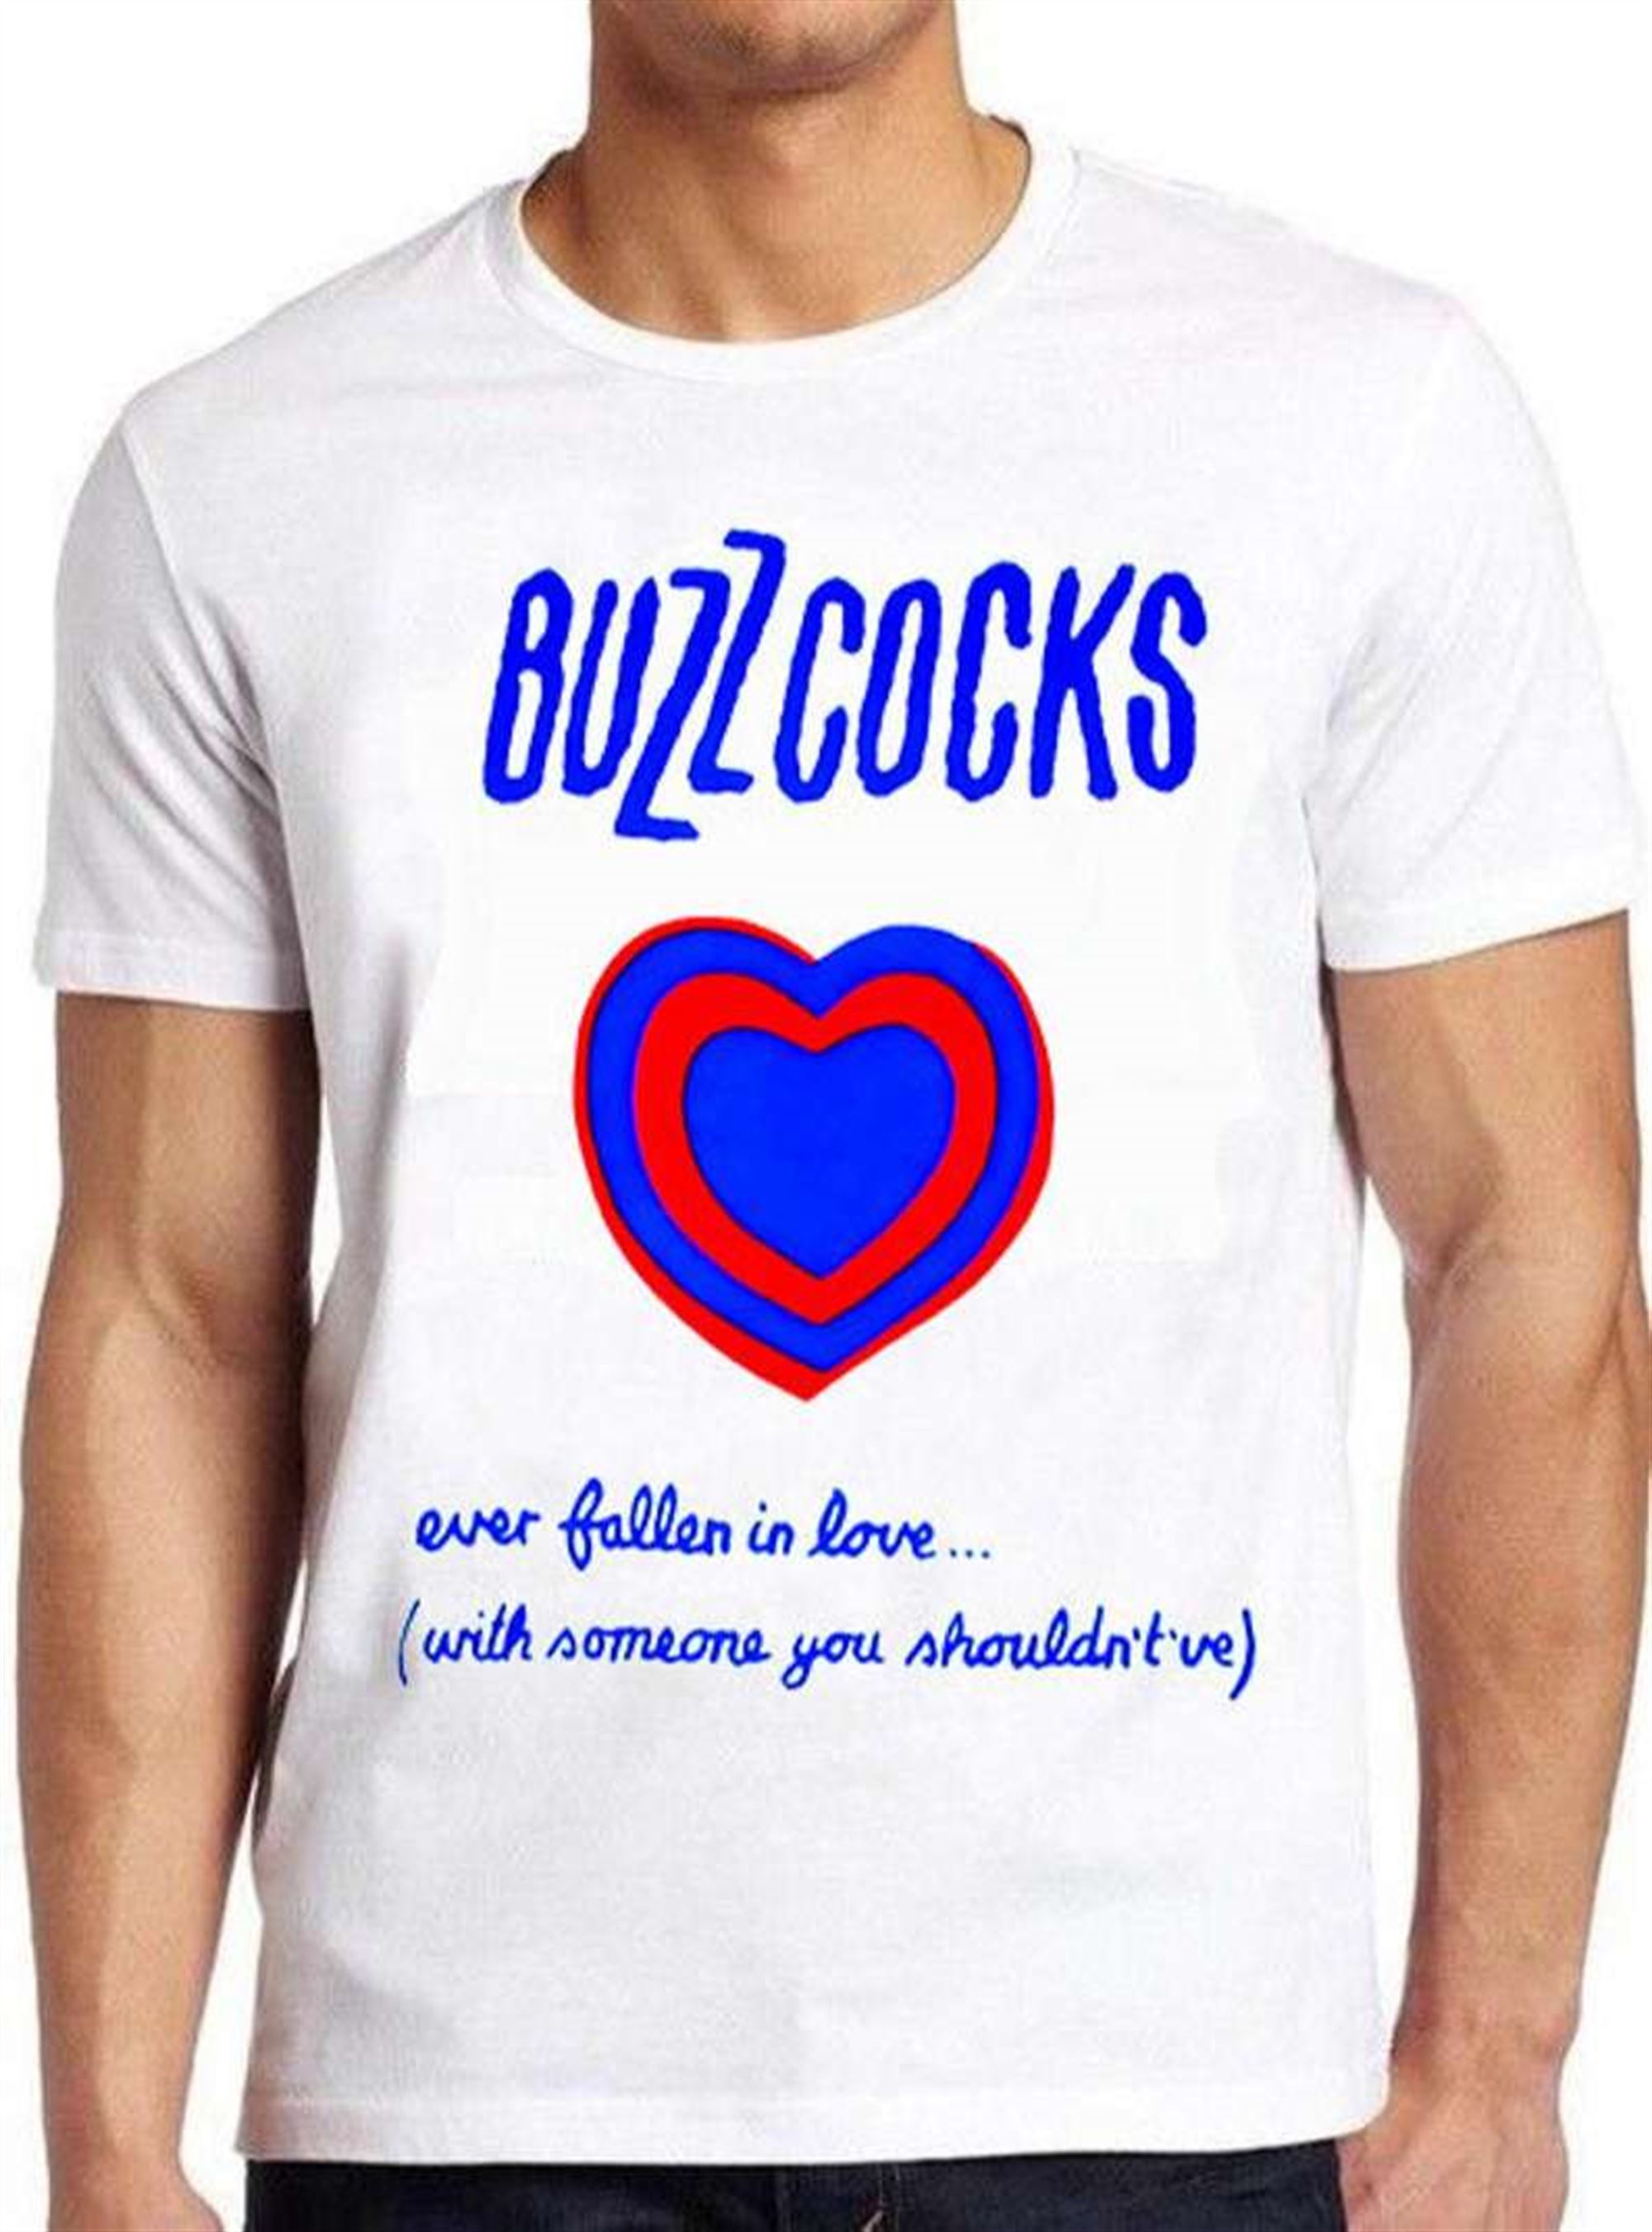 Buzzcocks T Shirt Ever Fallen In Love Size Up To 5xl